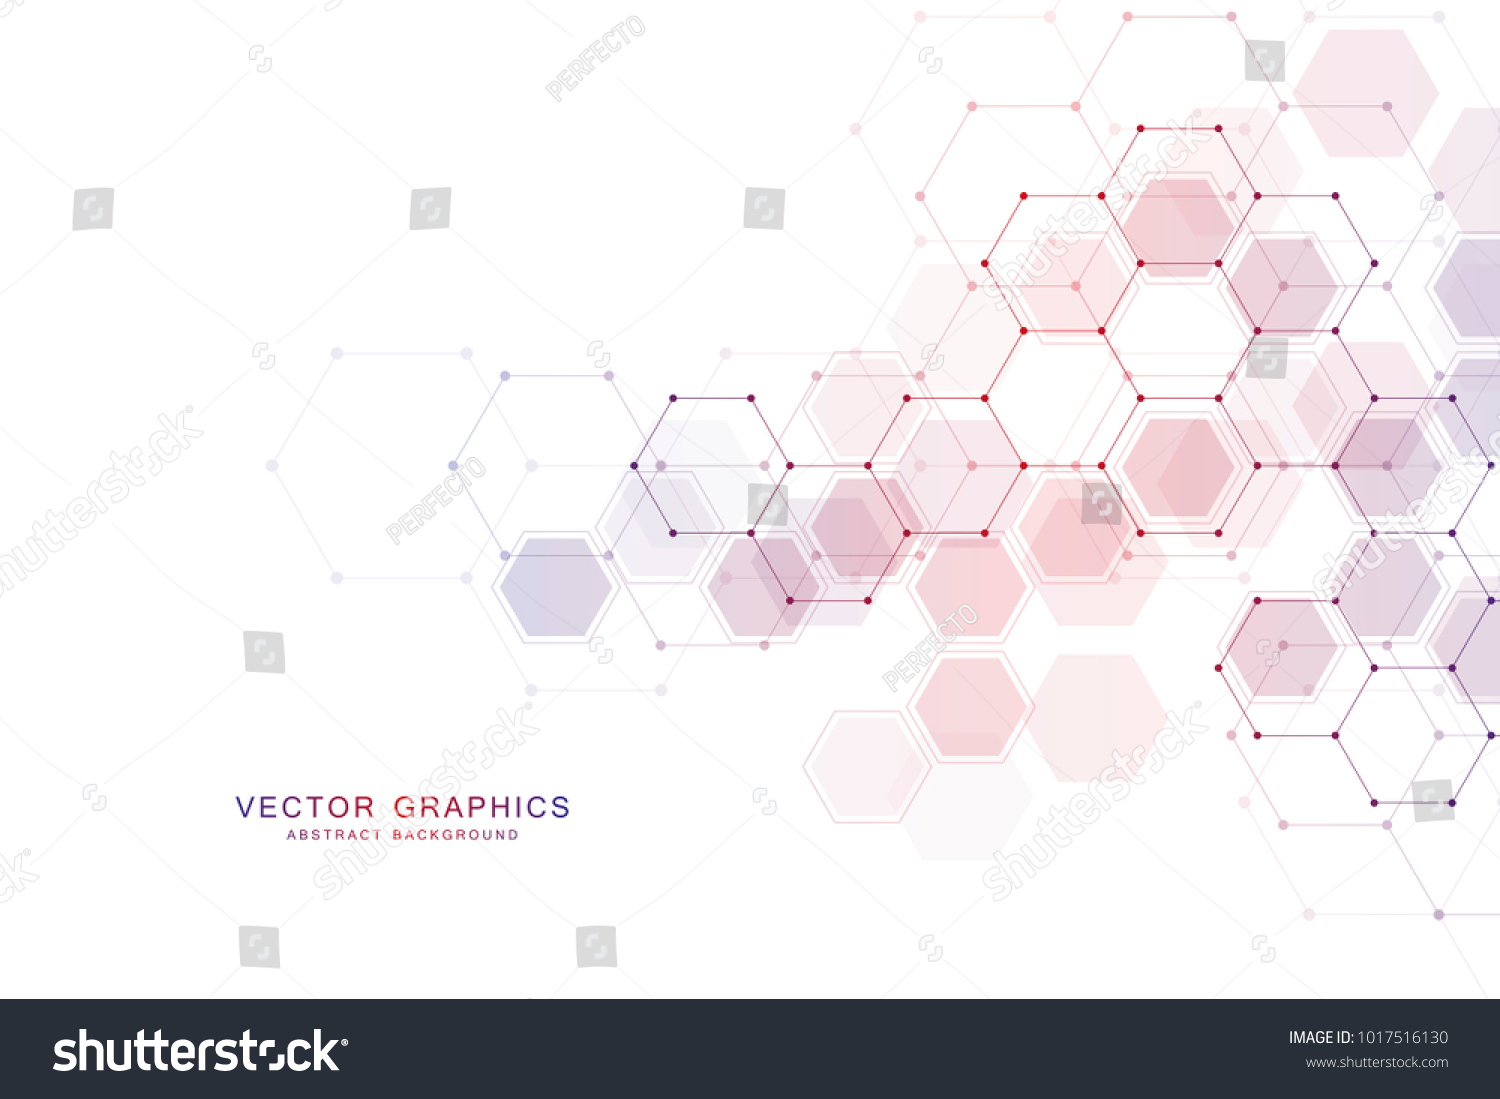 Geometric abstract background with hexagons. Structure molecule and communication. Science, technology and medical concept. Vector illustration #1017516130